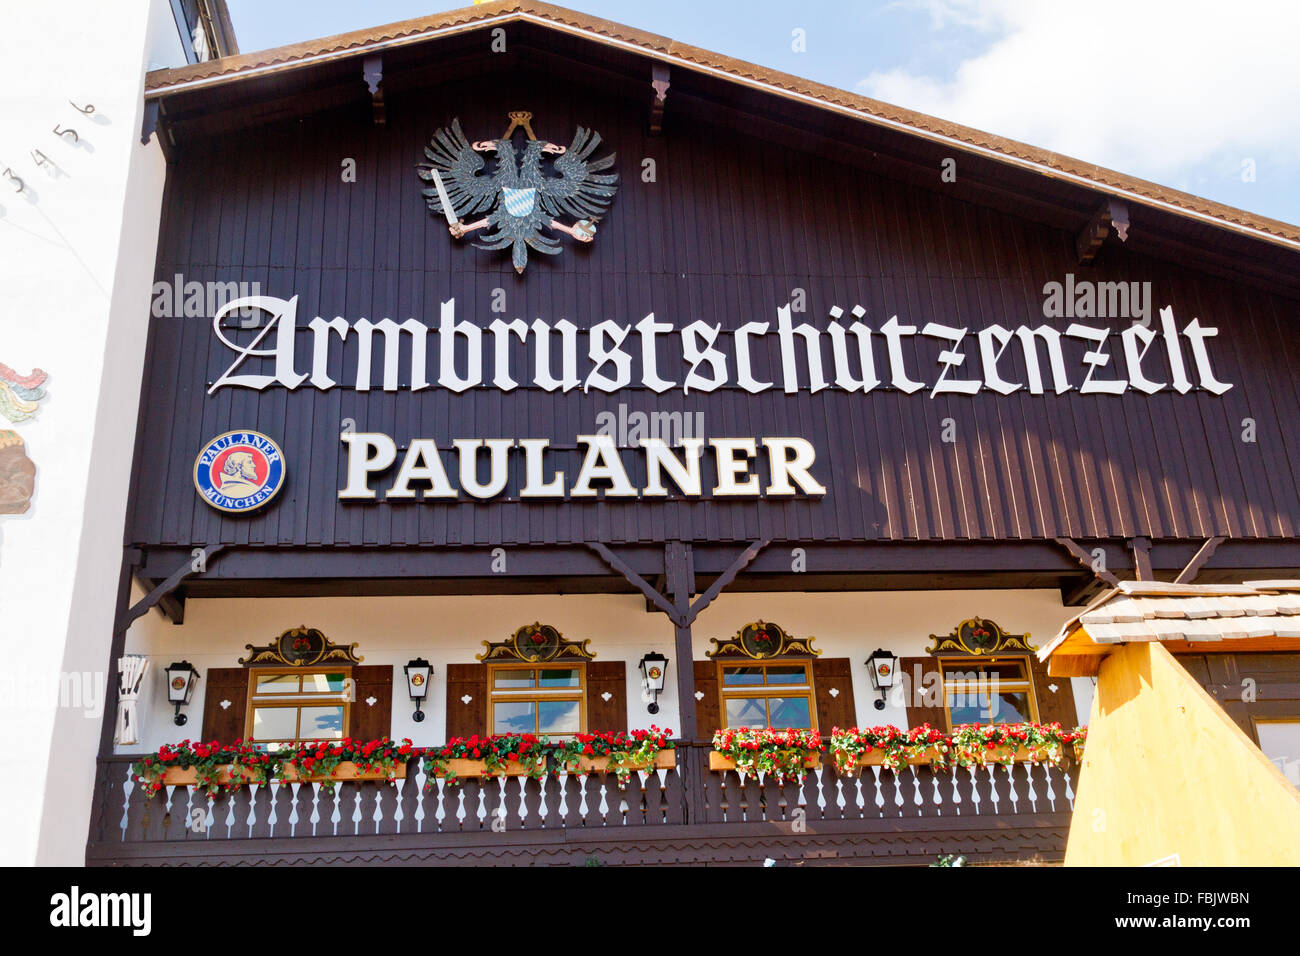 Facade of beer hall at Oktoberfest in Munich, Germany Stock Photo